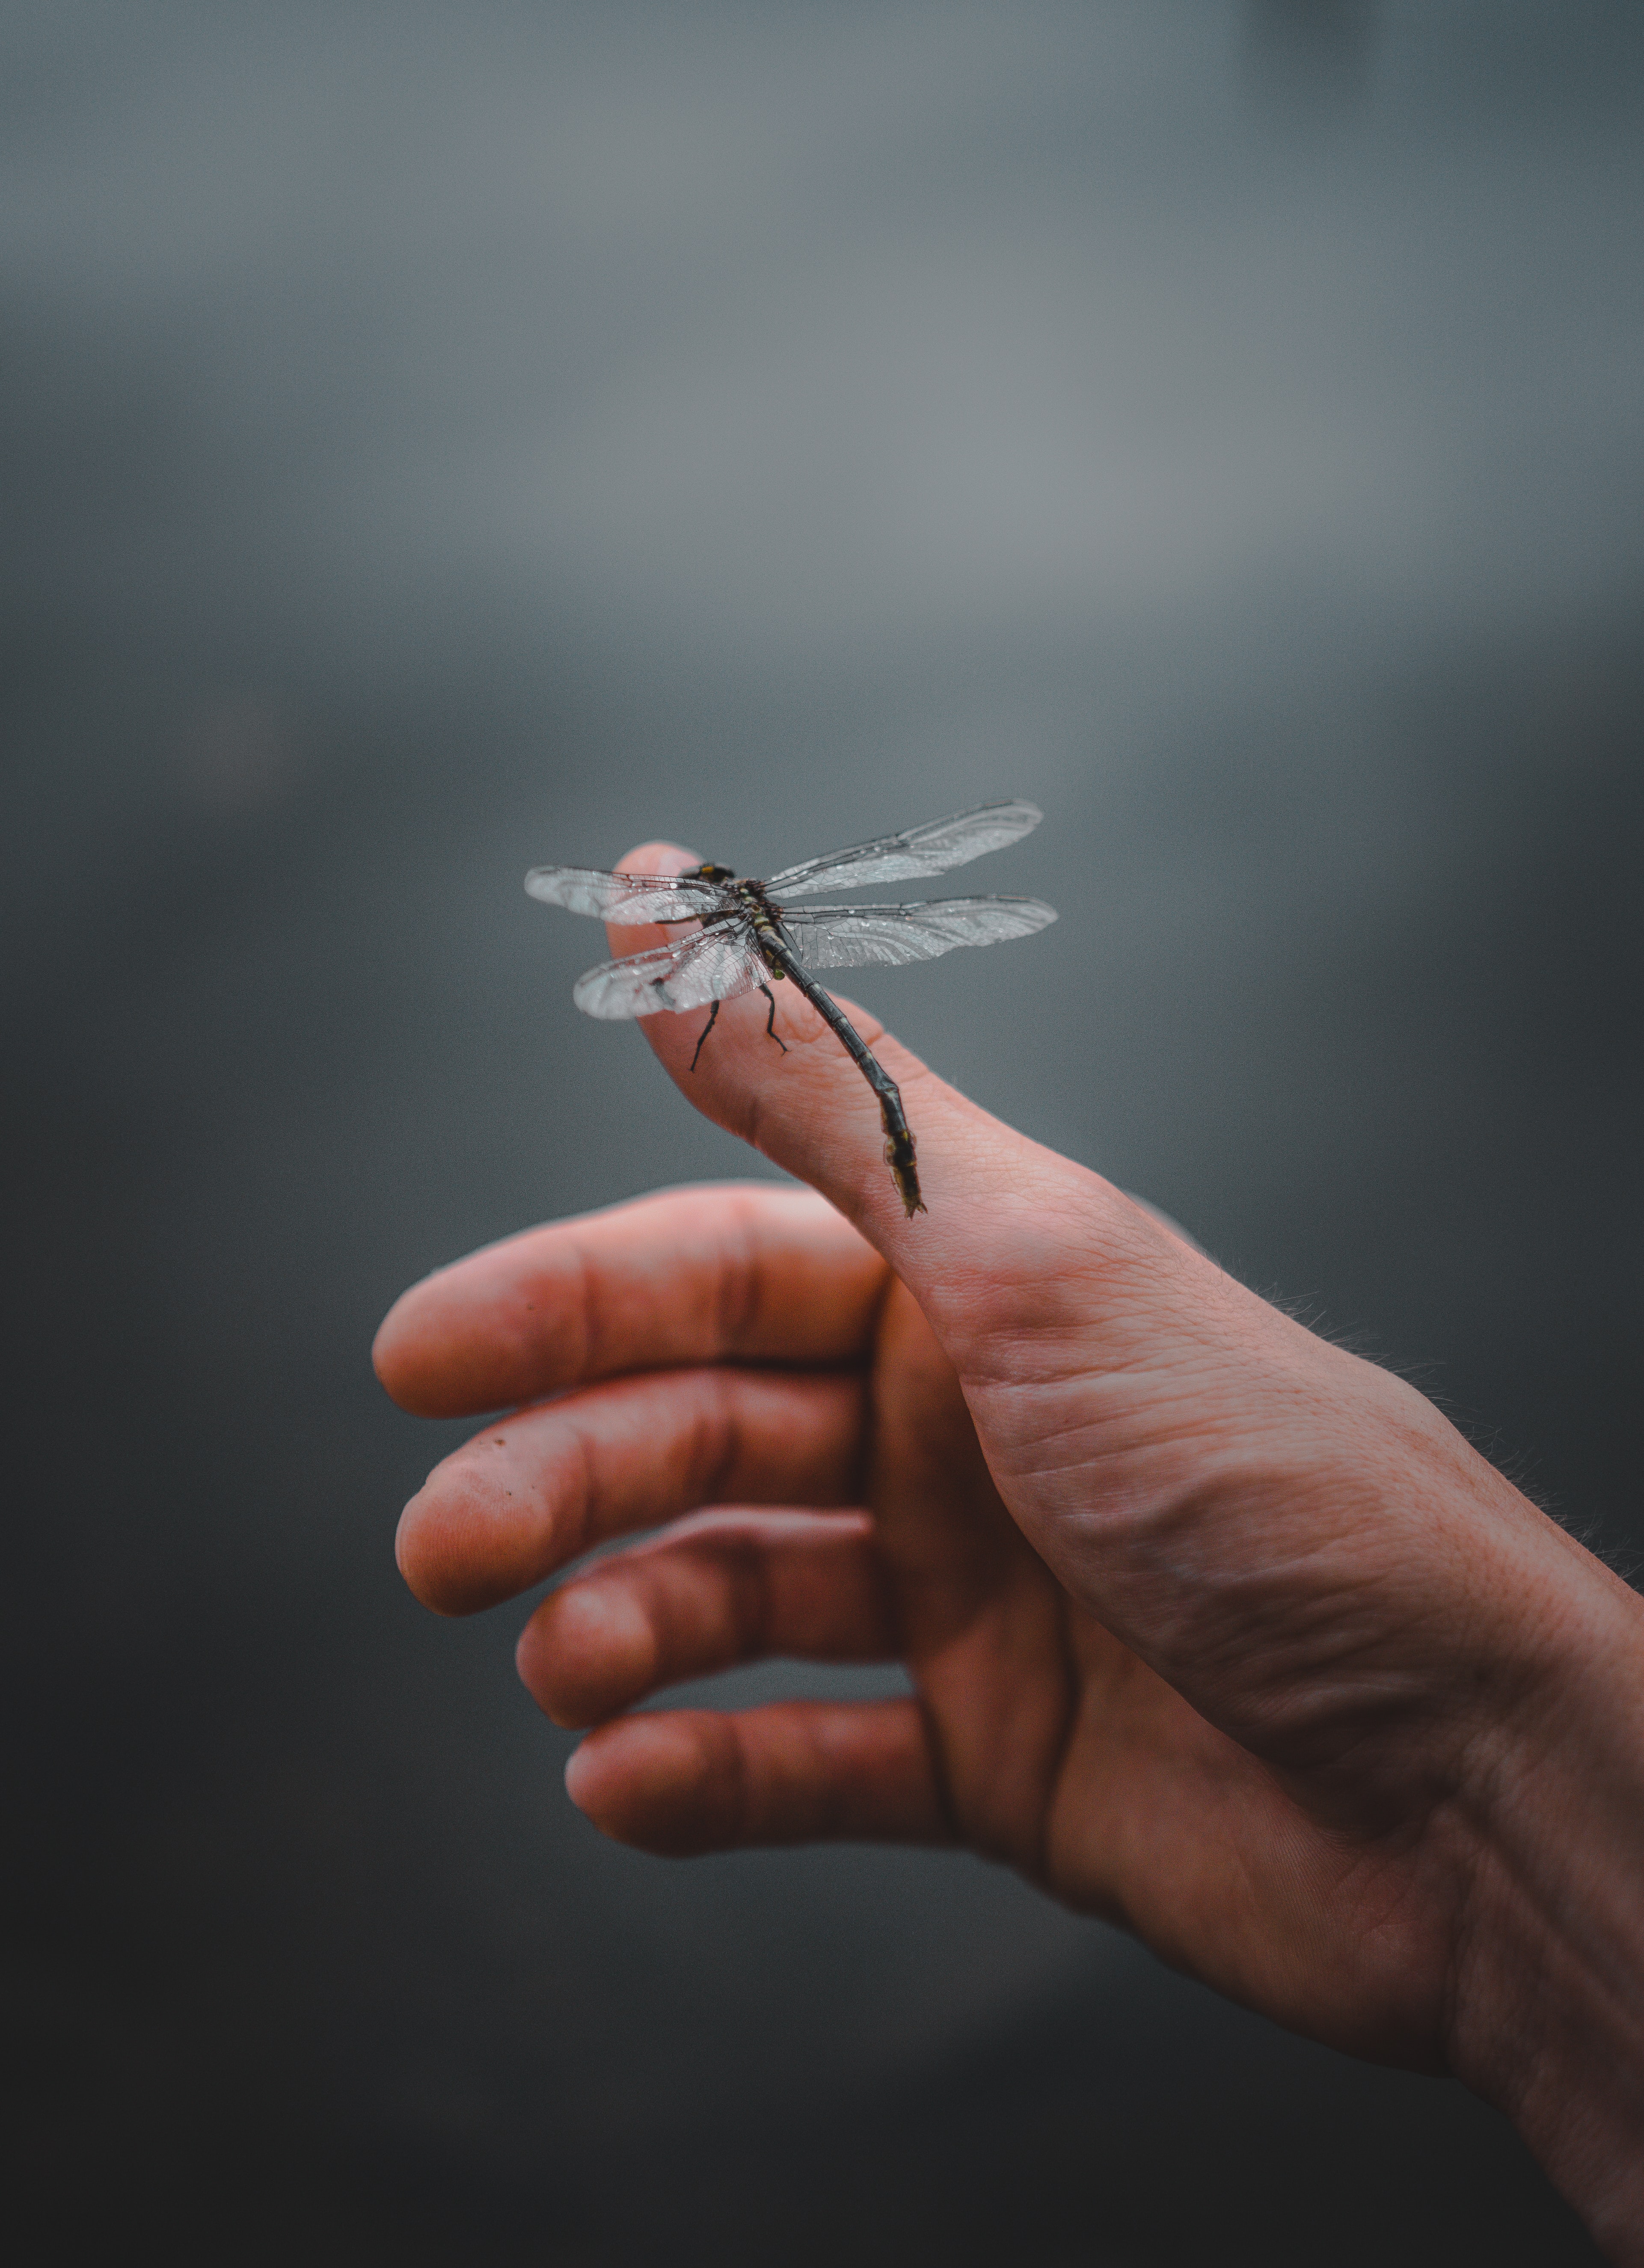 android dragonfly, fingers, hand, miscellanea, miscellaneous, insect